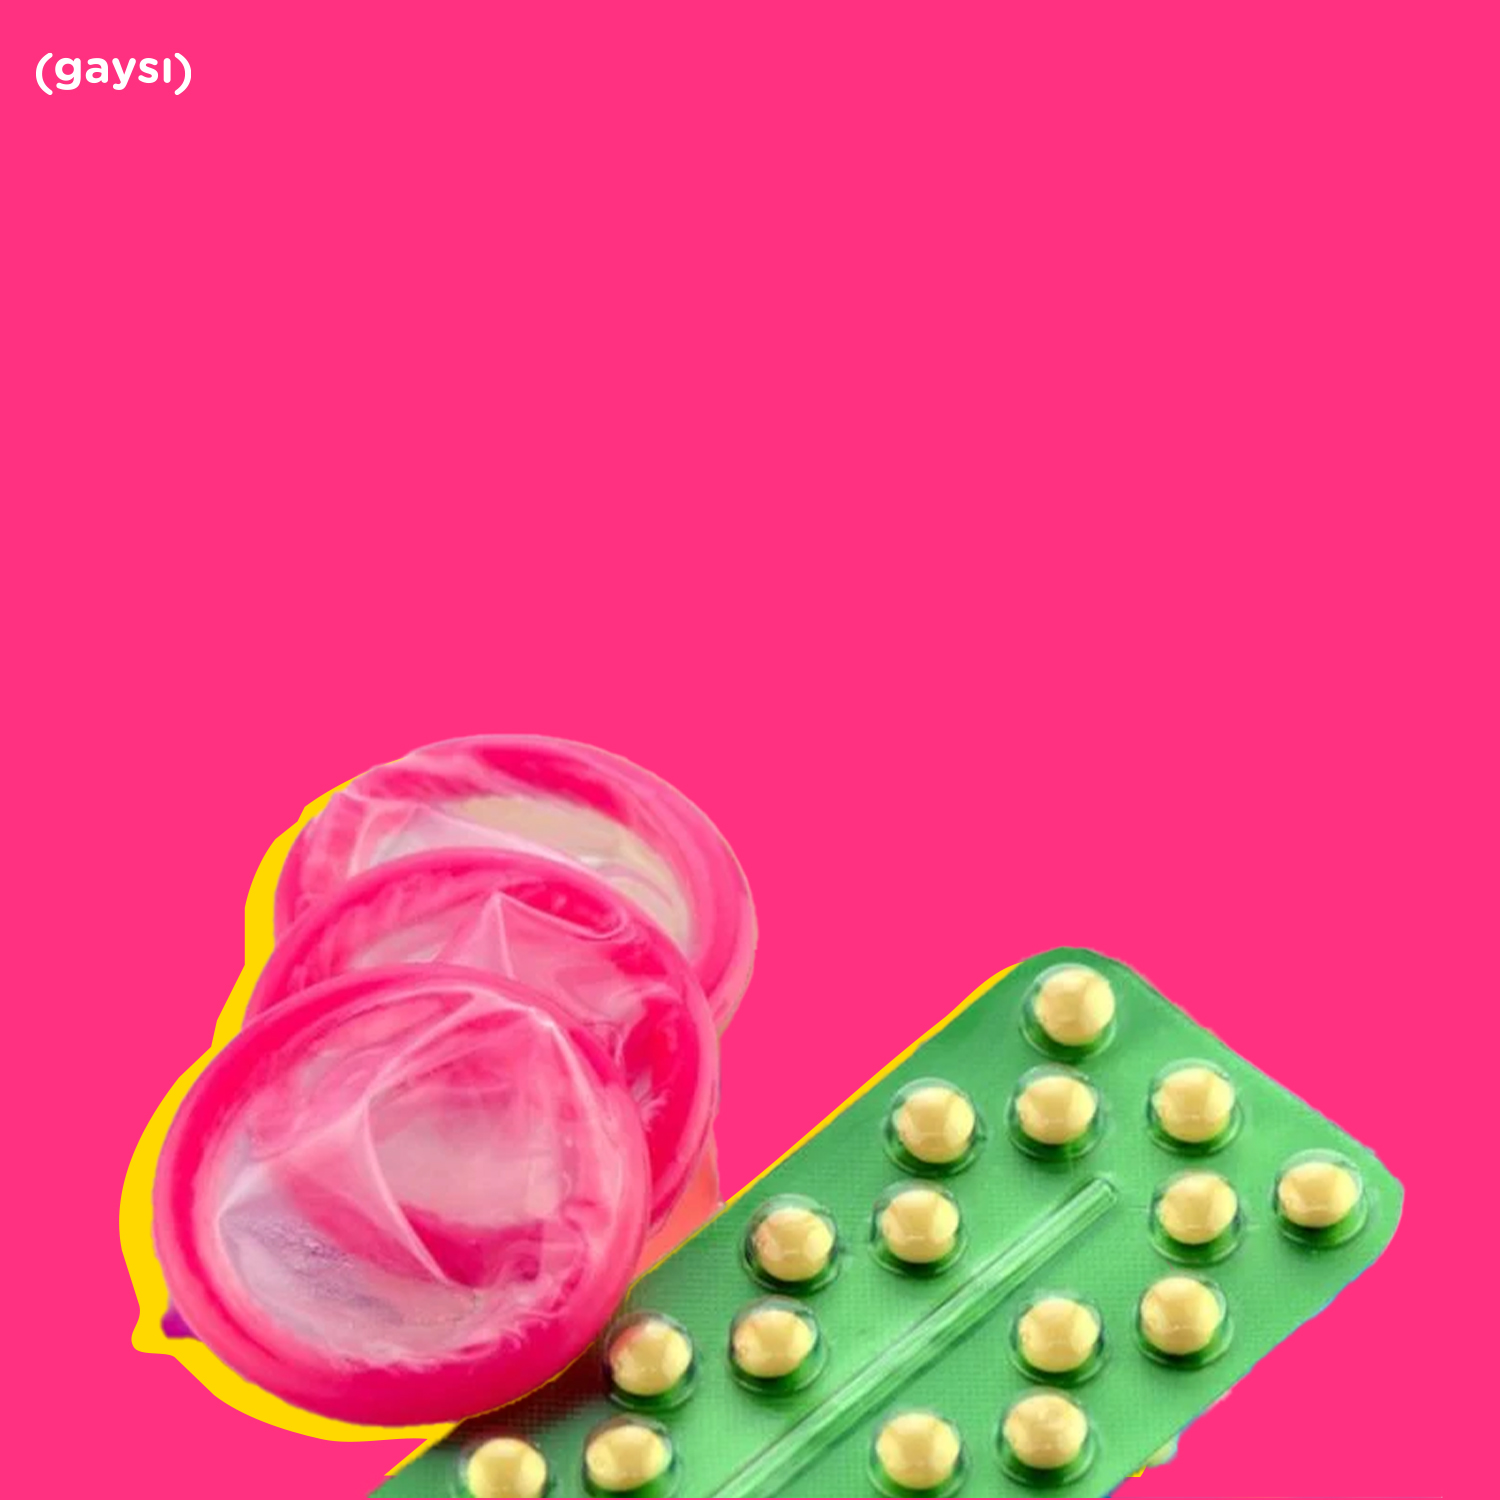 Inaccessibility Of Condoms Just Another Woe In A Long List Of Child Rights Issue In Karnataka